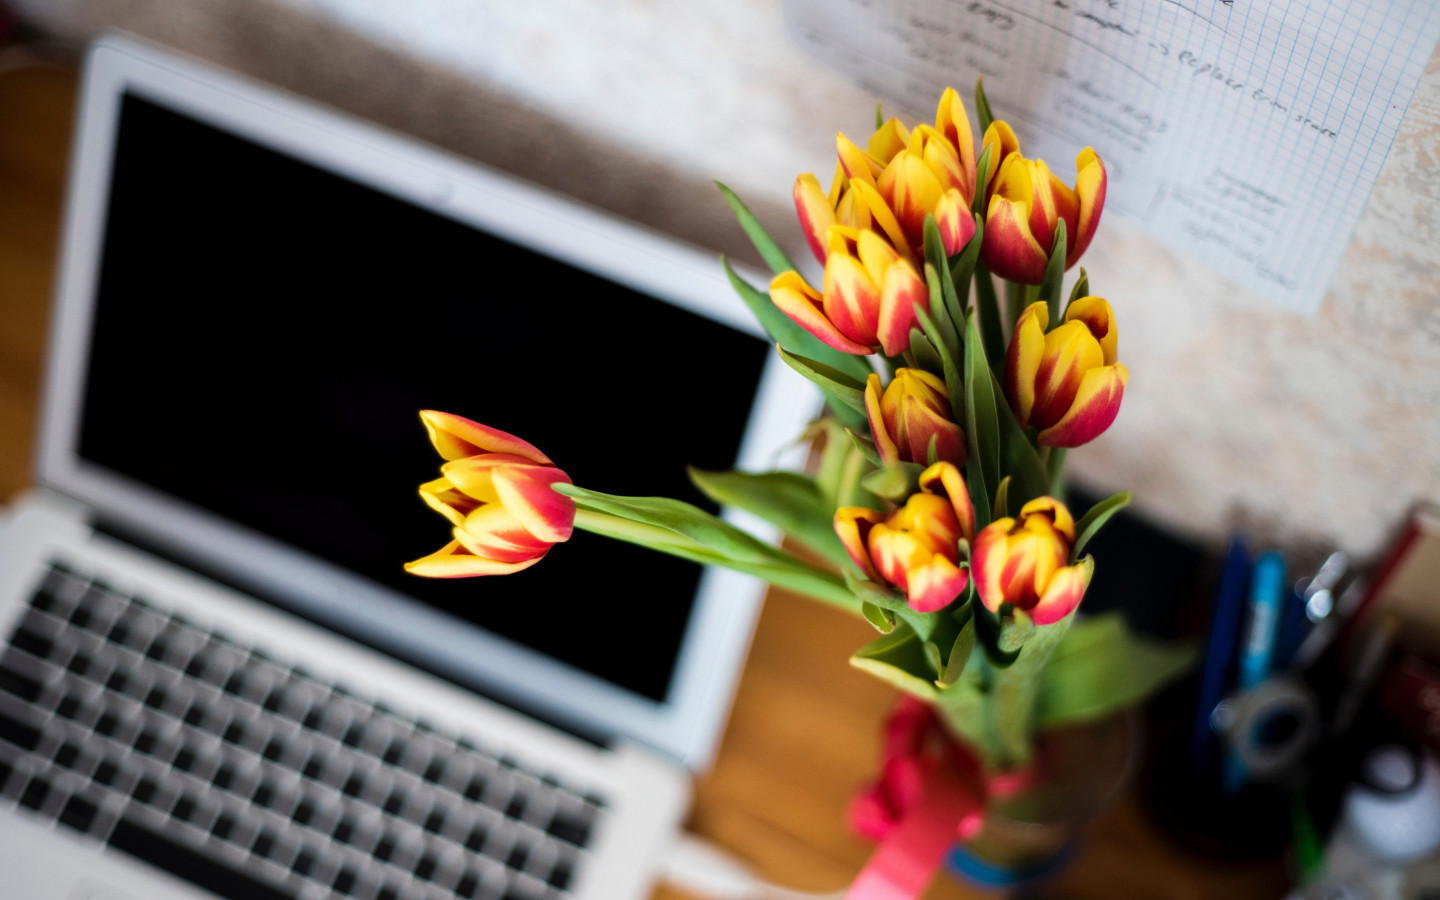 Laptop and tulips bouquet wallpaper 1440x900